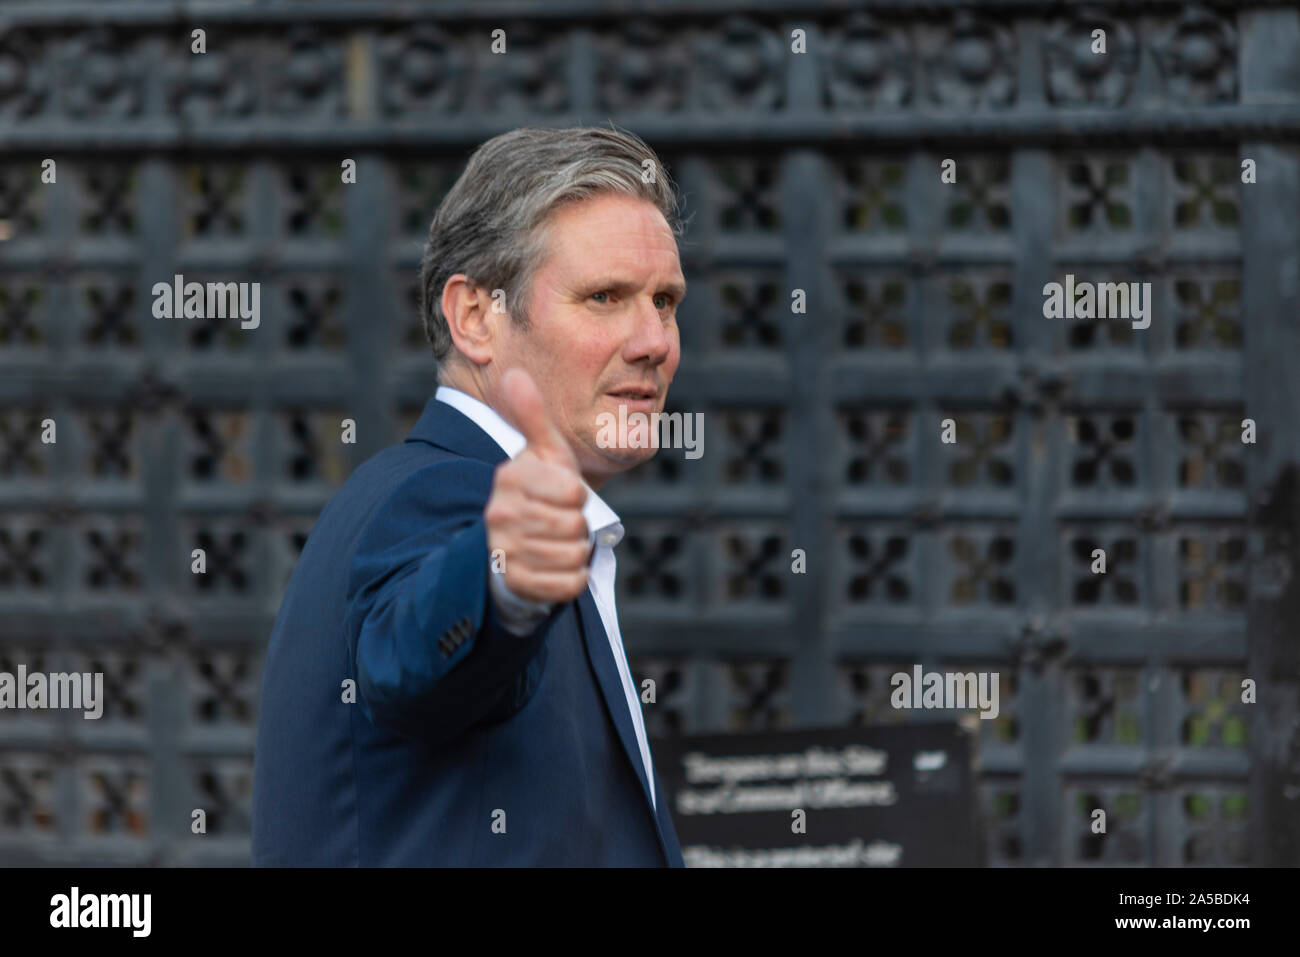 Members are leaving Parliament after sitting on a weekend for the first time since April 1982 to debate and vote on Prime Minister Boris Johnson's Brexit deal. Protesters gathered outside. Thumbs up from MP Keir Starmer Stock Photo